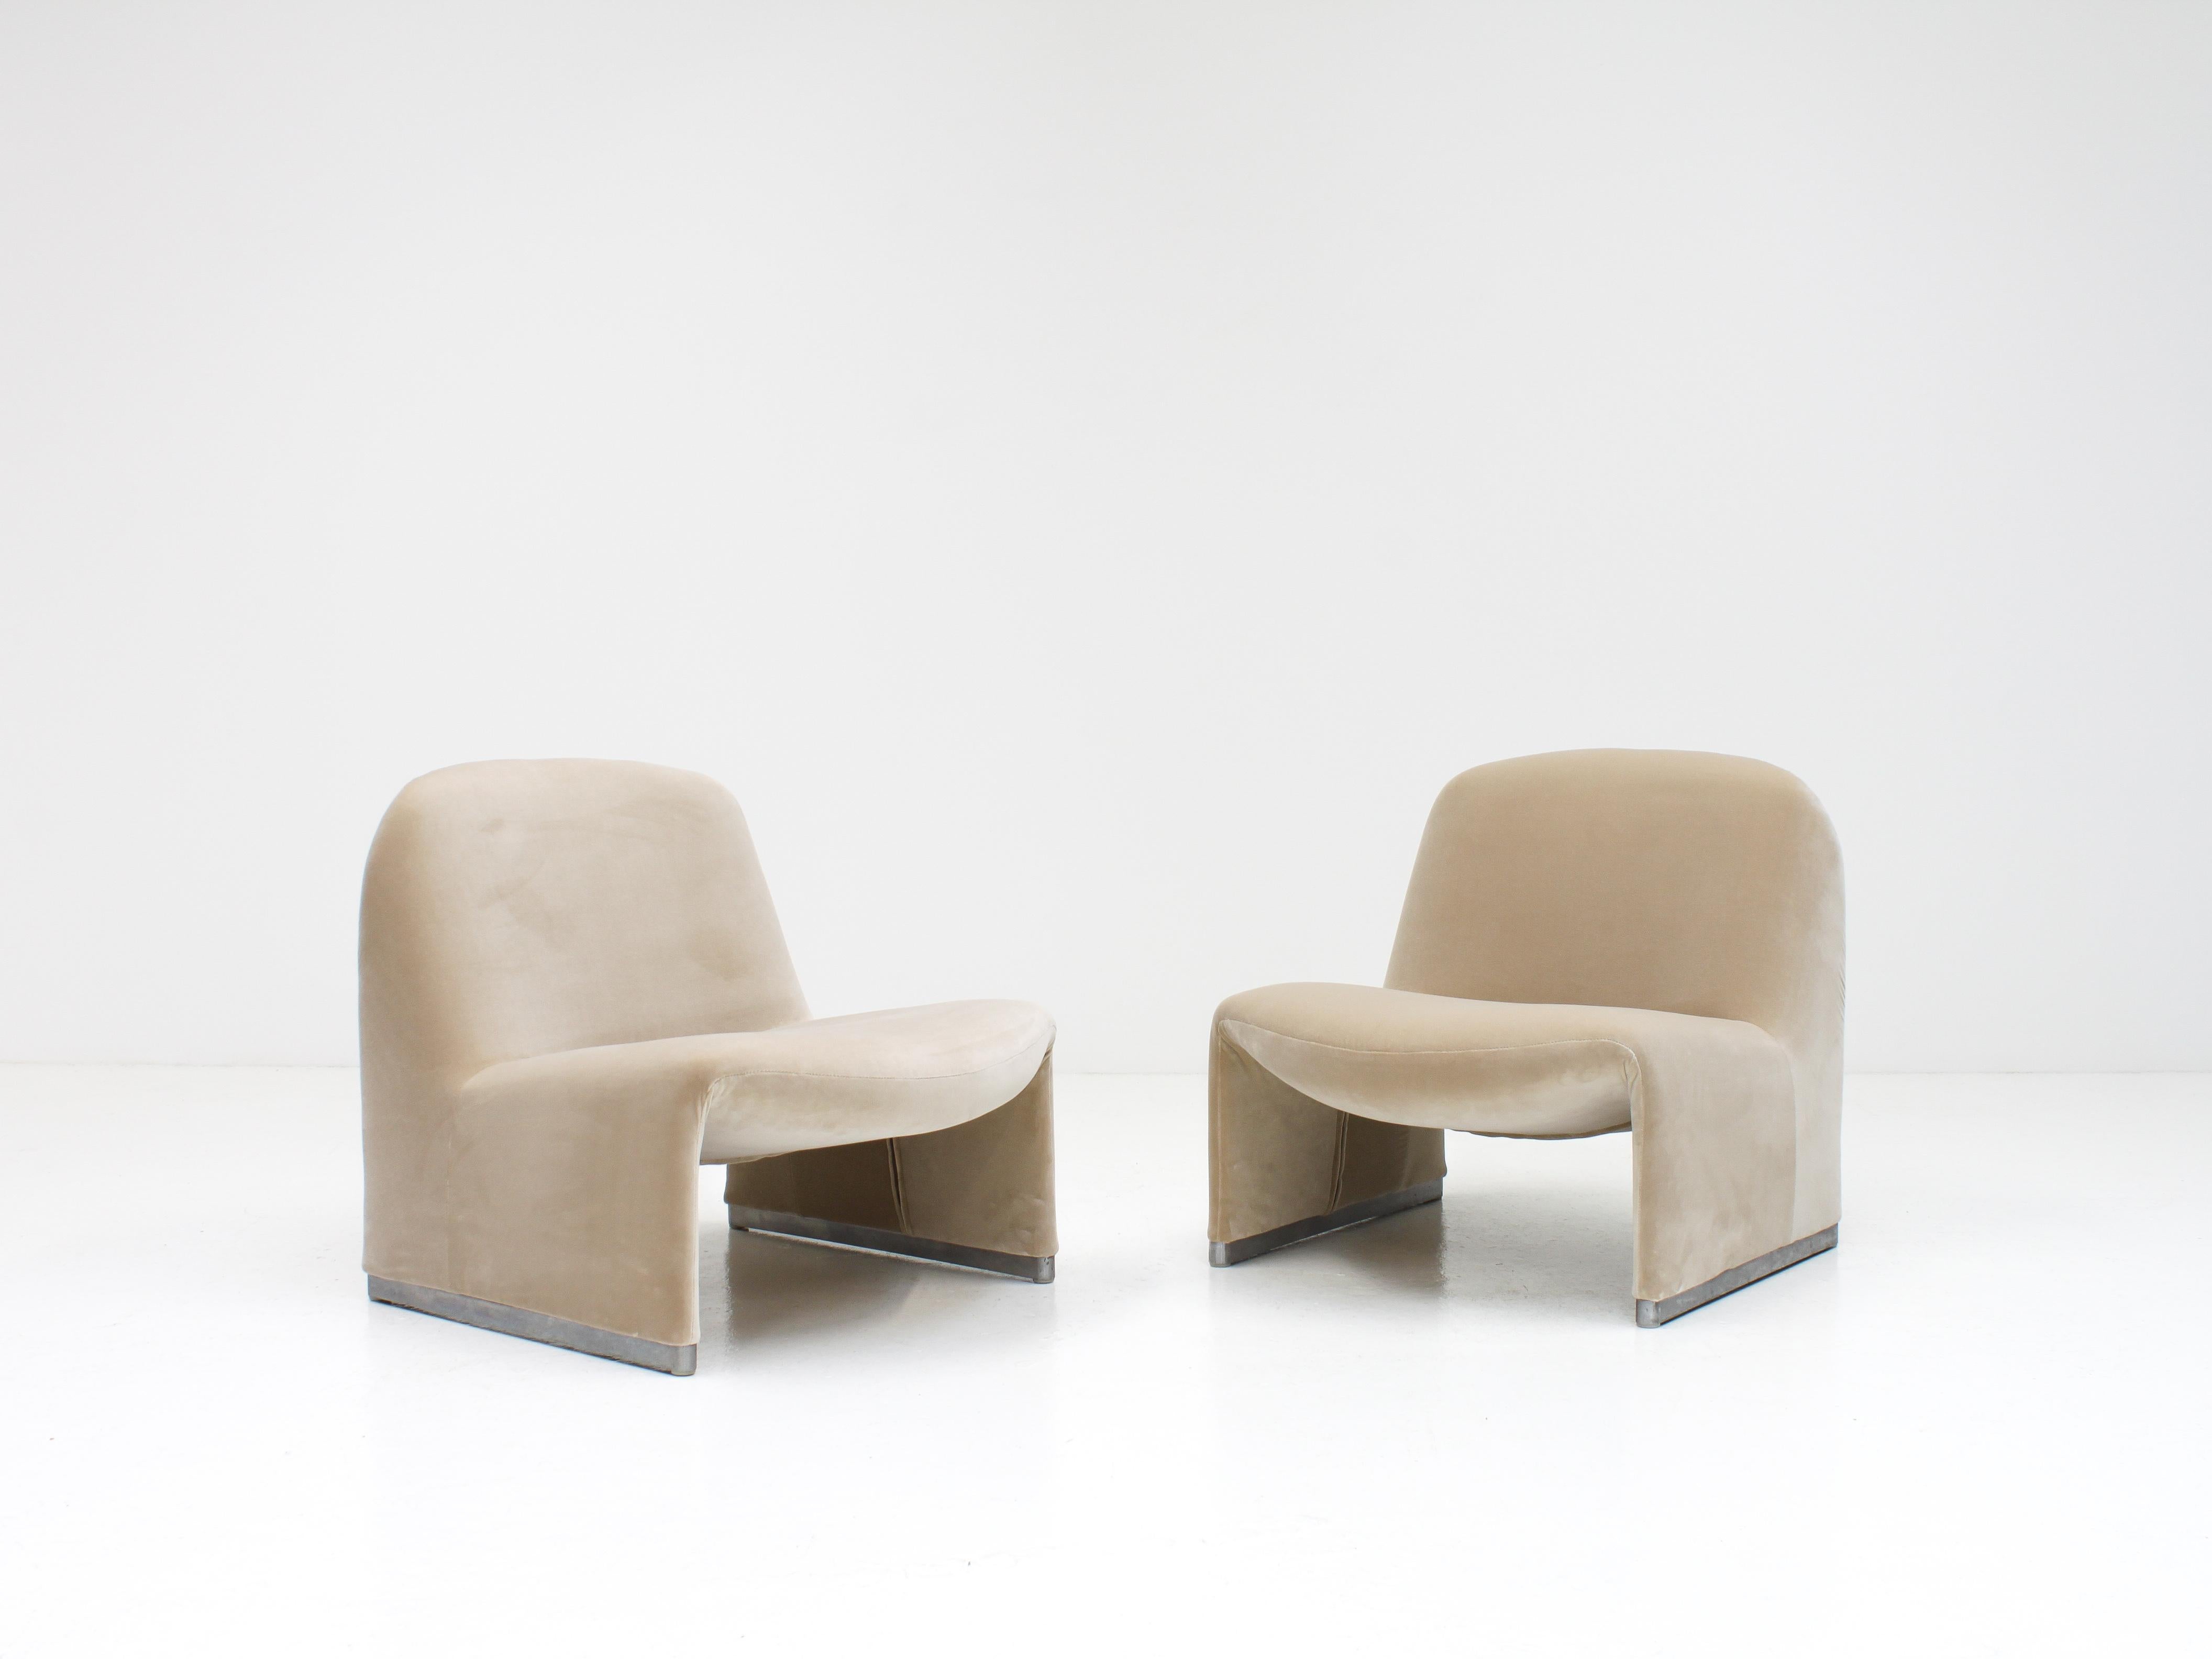 A pair of Giancarlo Piretti “Alky” chairs newly upholstered in Designers Guild linen-colored cotton velvet.

Designers Guild 'Varese' velvet, is a cotton velvet that is lustrous and elegant.

The Alky chairs themselves were manufactured by Artifort